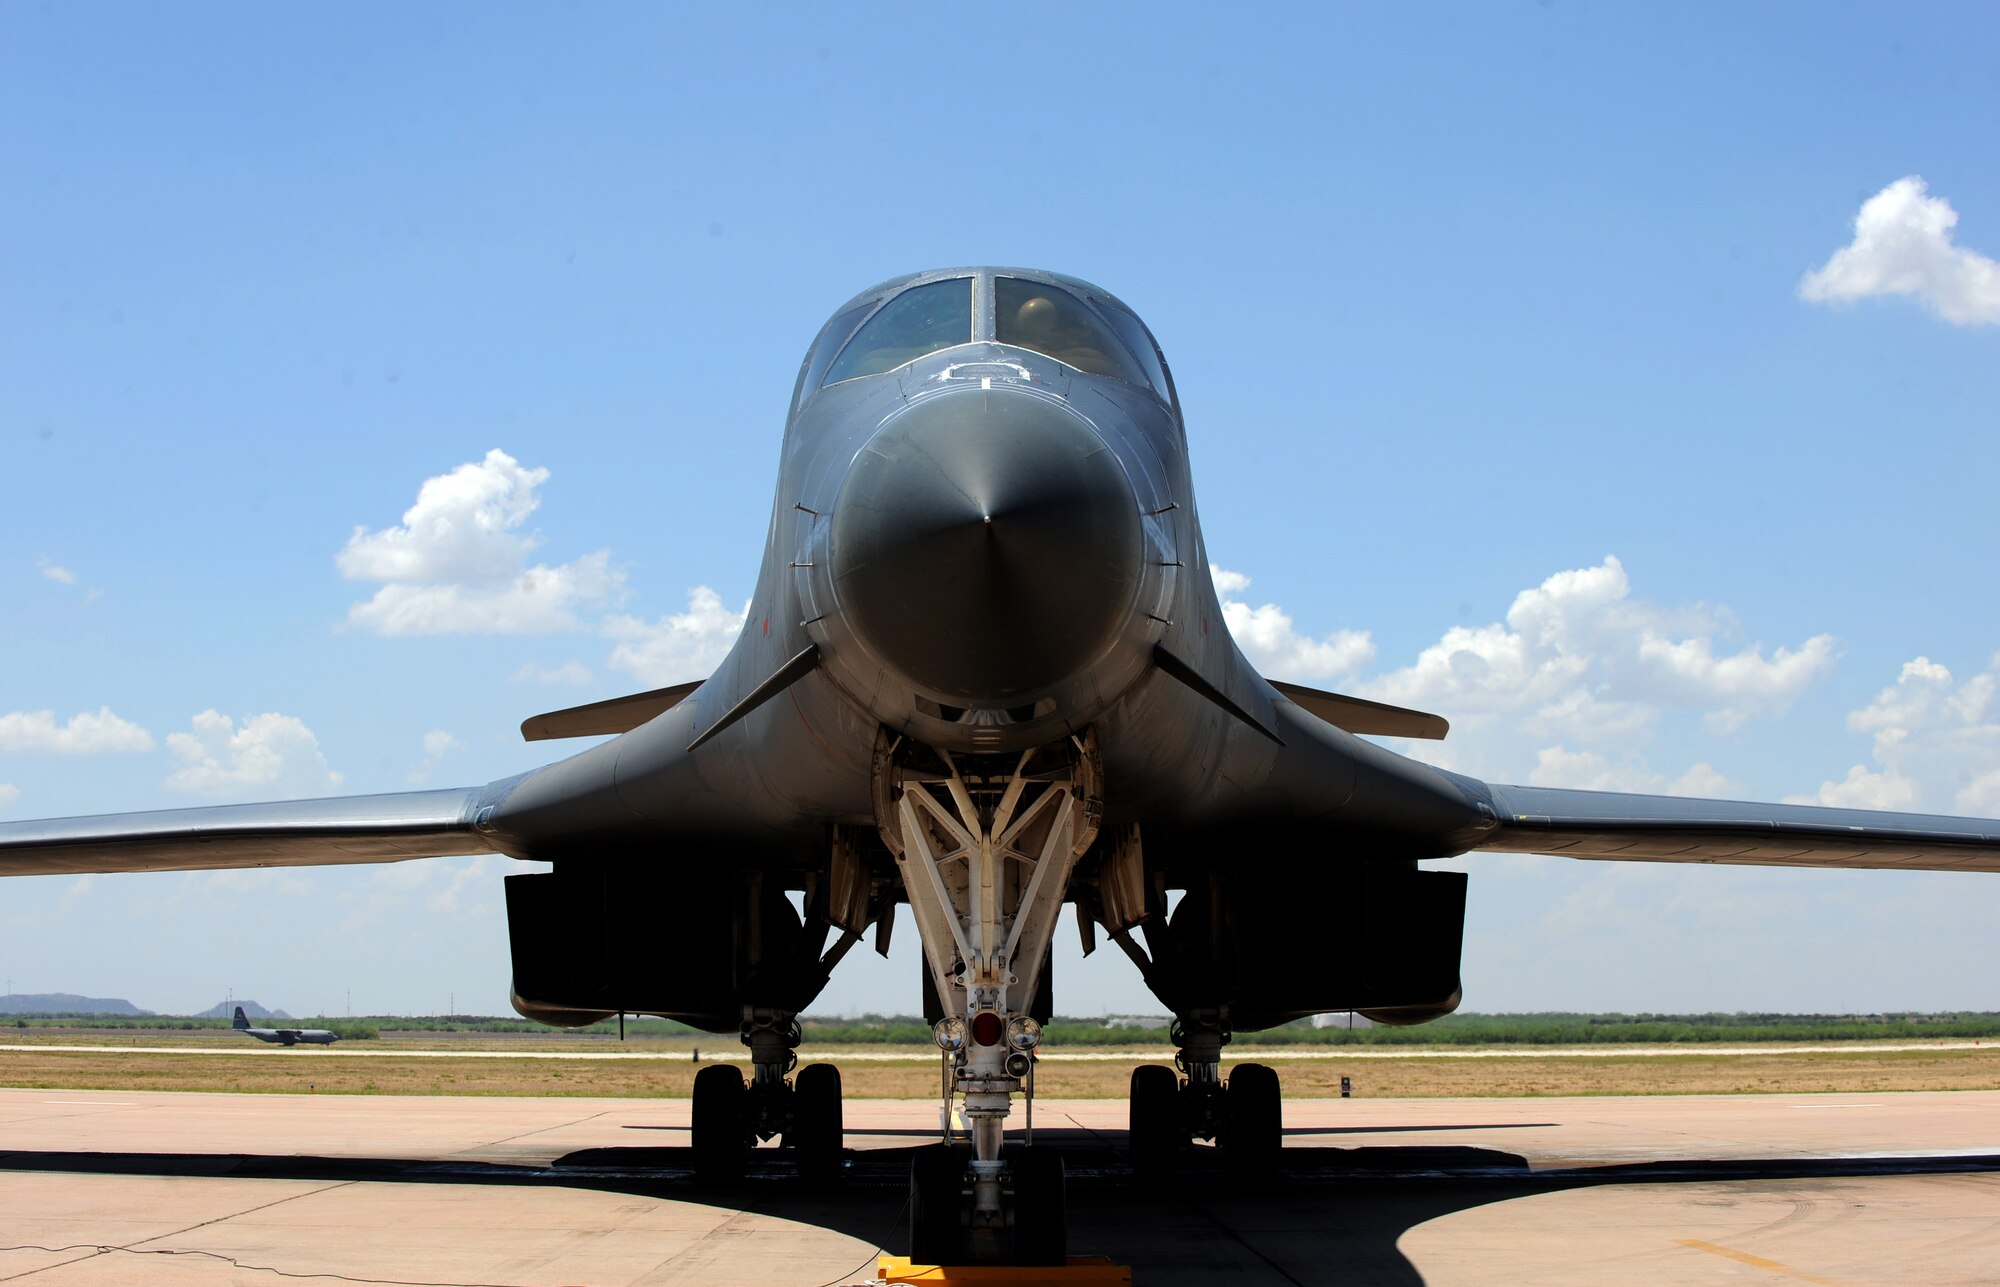 Dyess’ newest upgraded B-1B Lancer arrives May 7, 2014, at Dyess Air Force Base, Texas. This B-1 is the second of two aircraft to arrive at Dyess with the new Integrated Battle Station upgrade and the Sustainment-Block 16 upgrade. These modifications fall under the Integrated Battle Station initiative, which is slated to be installed concurrently on all B-1s through 2019. (U.S. Air Force photo by Airman 1st Class Alexander Guerrero/Released)